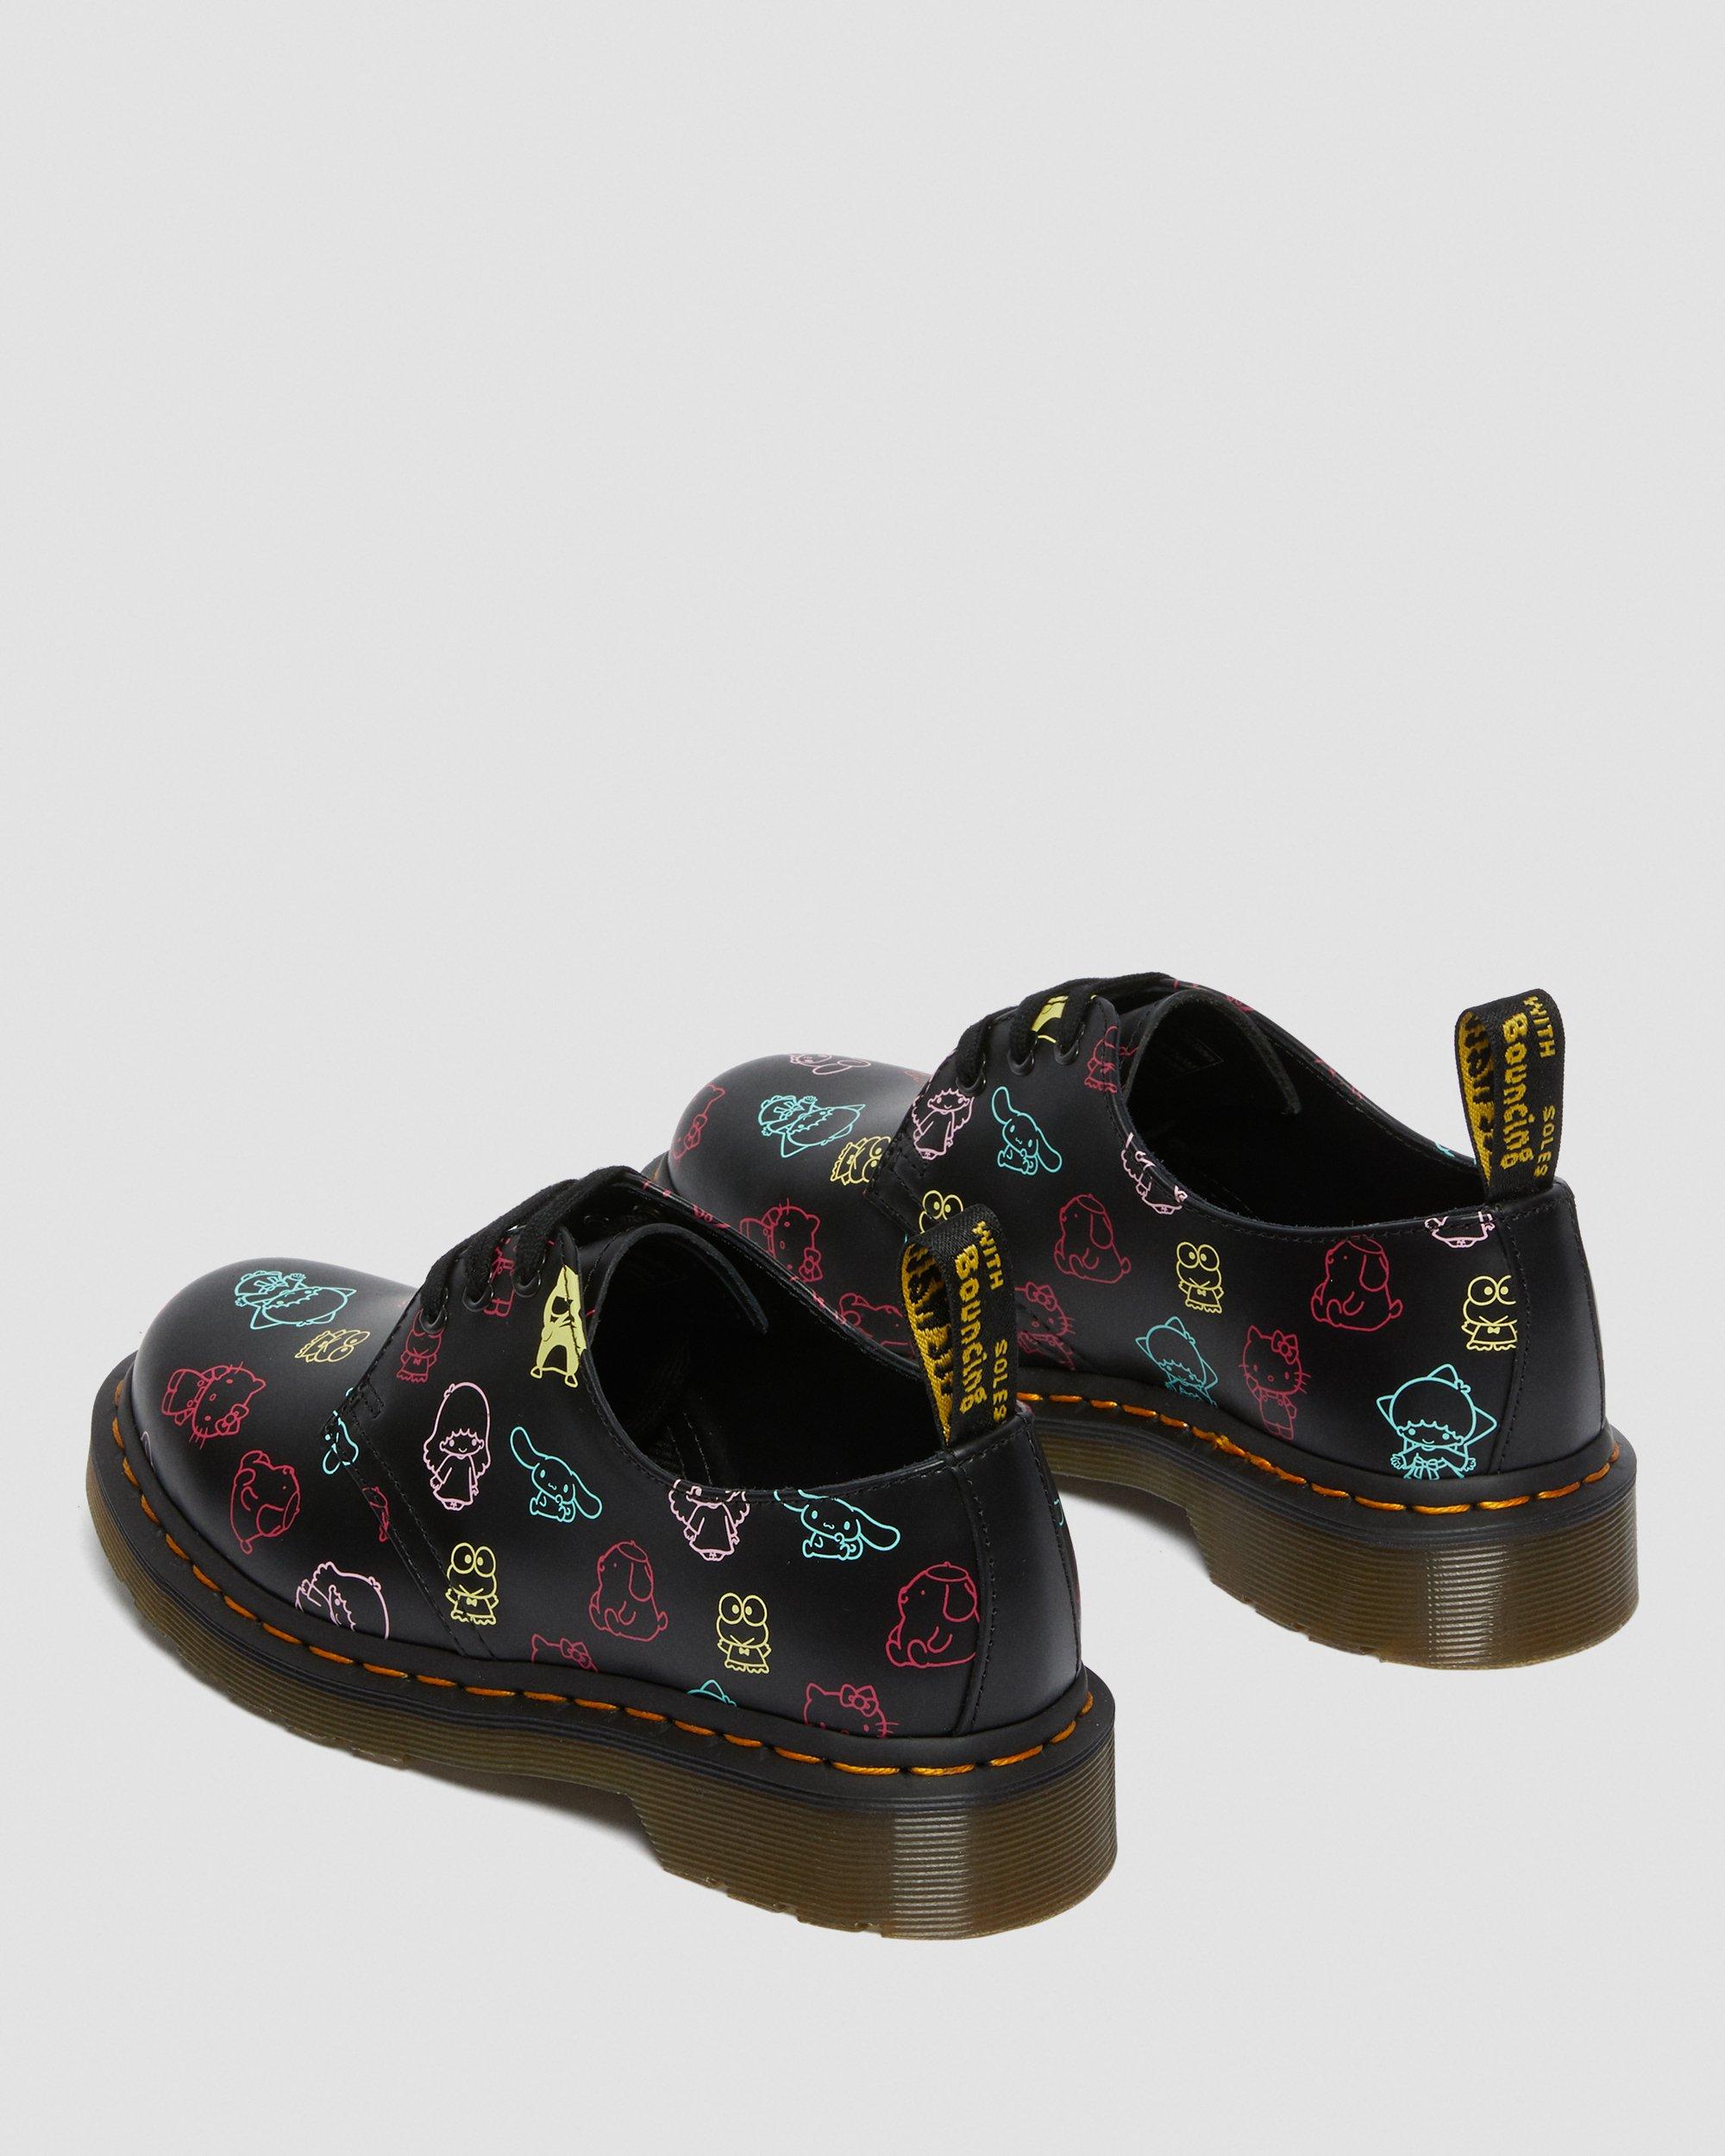 1461 Hello Kitty & Friends Leather Shoes  in Sort+Multi